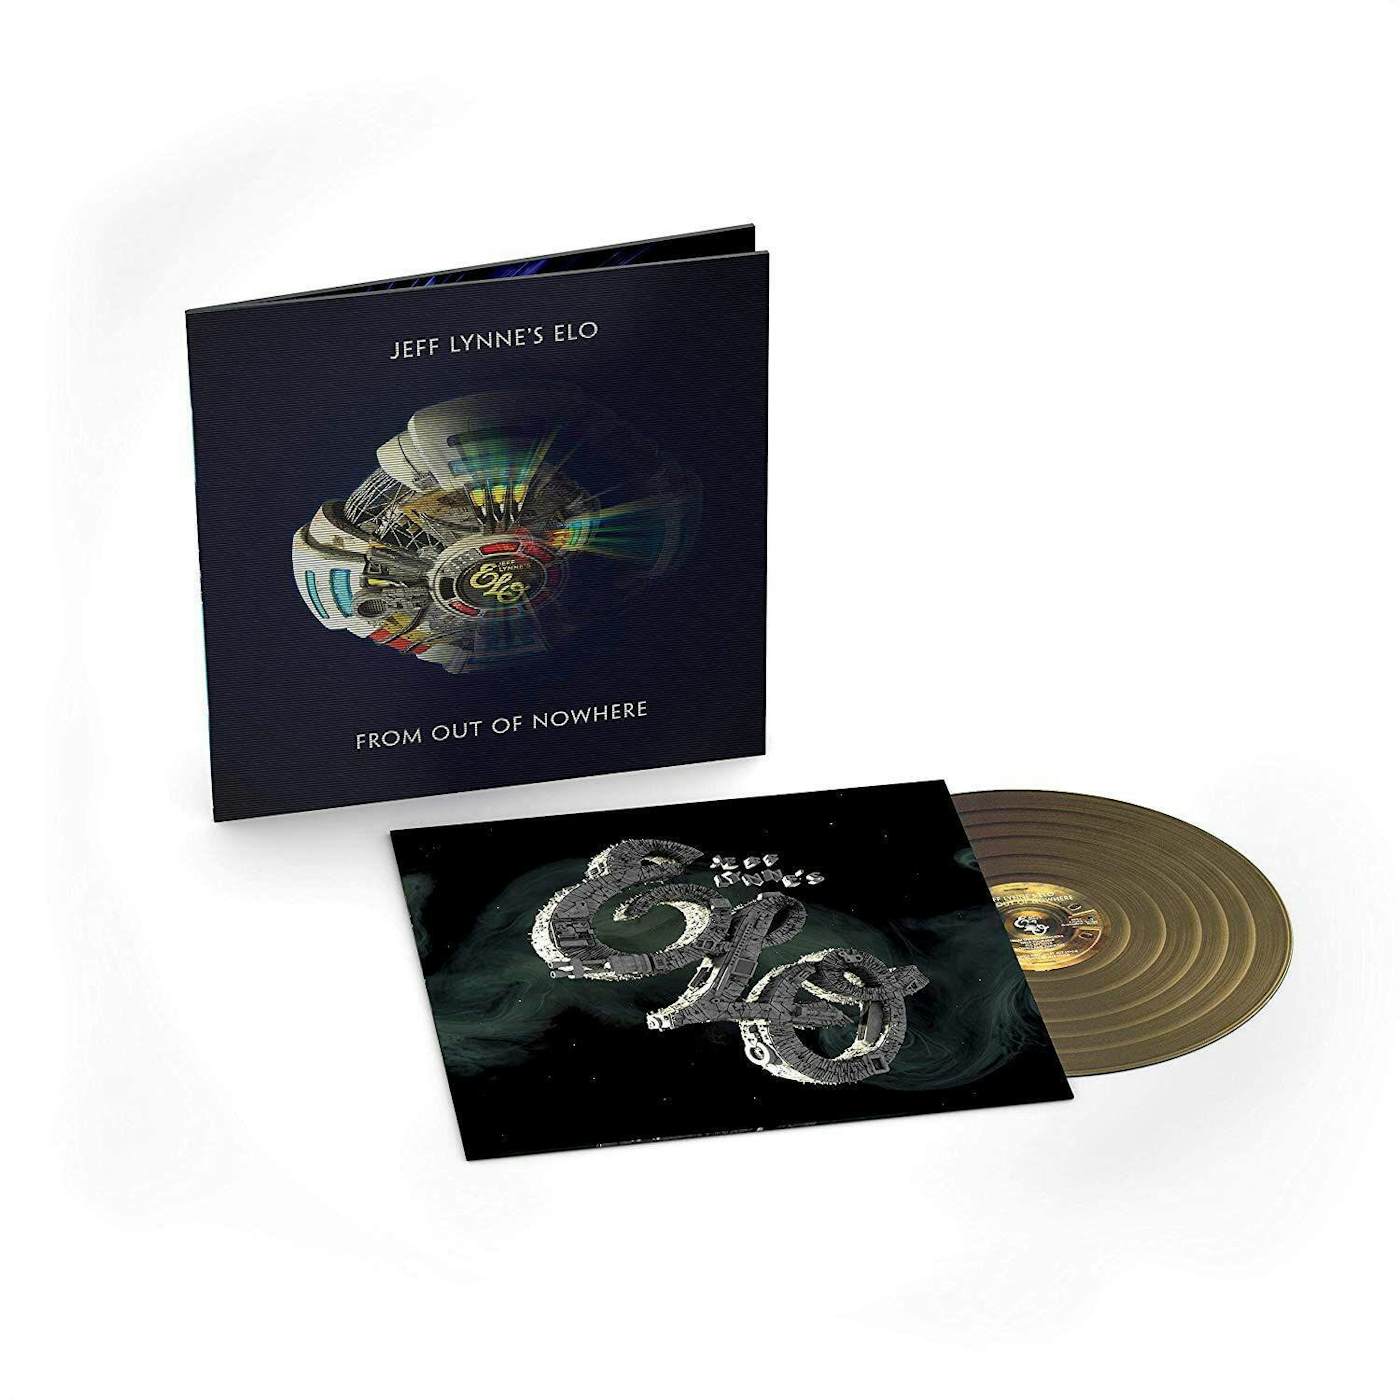 ELO (Electric Light Orchestra) From Out Of Nowhere (180g/Metallic Gold/Animated Lenticular Cover With Spaceship) Vinyl Record